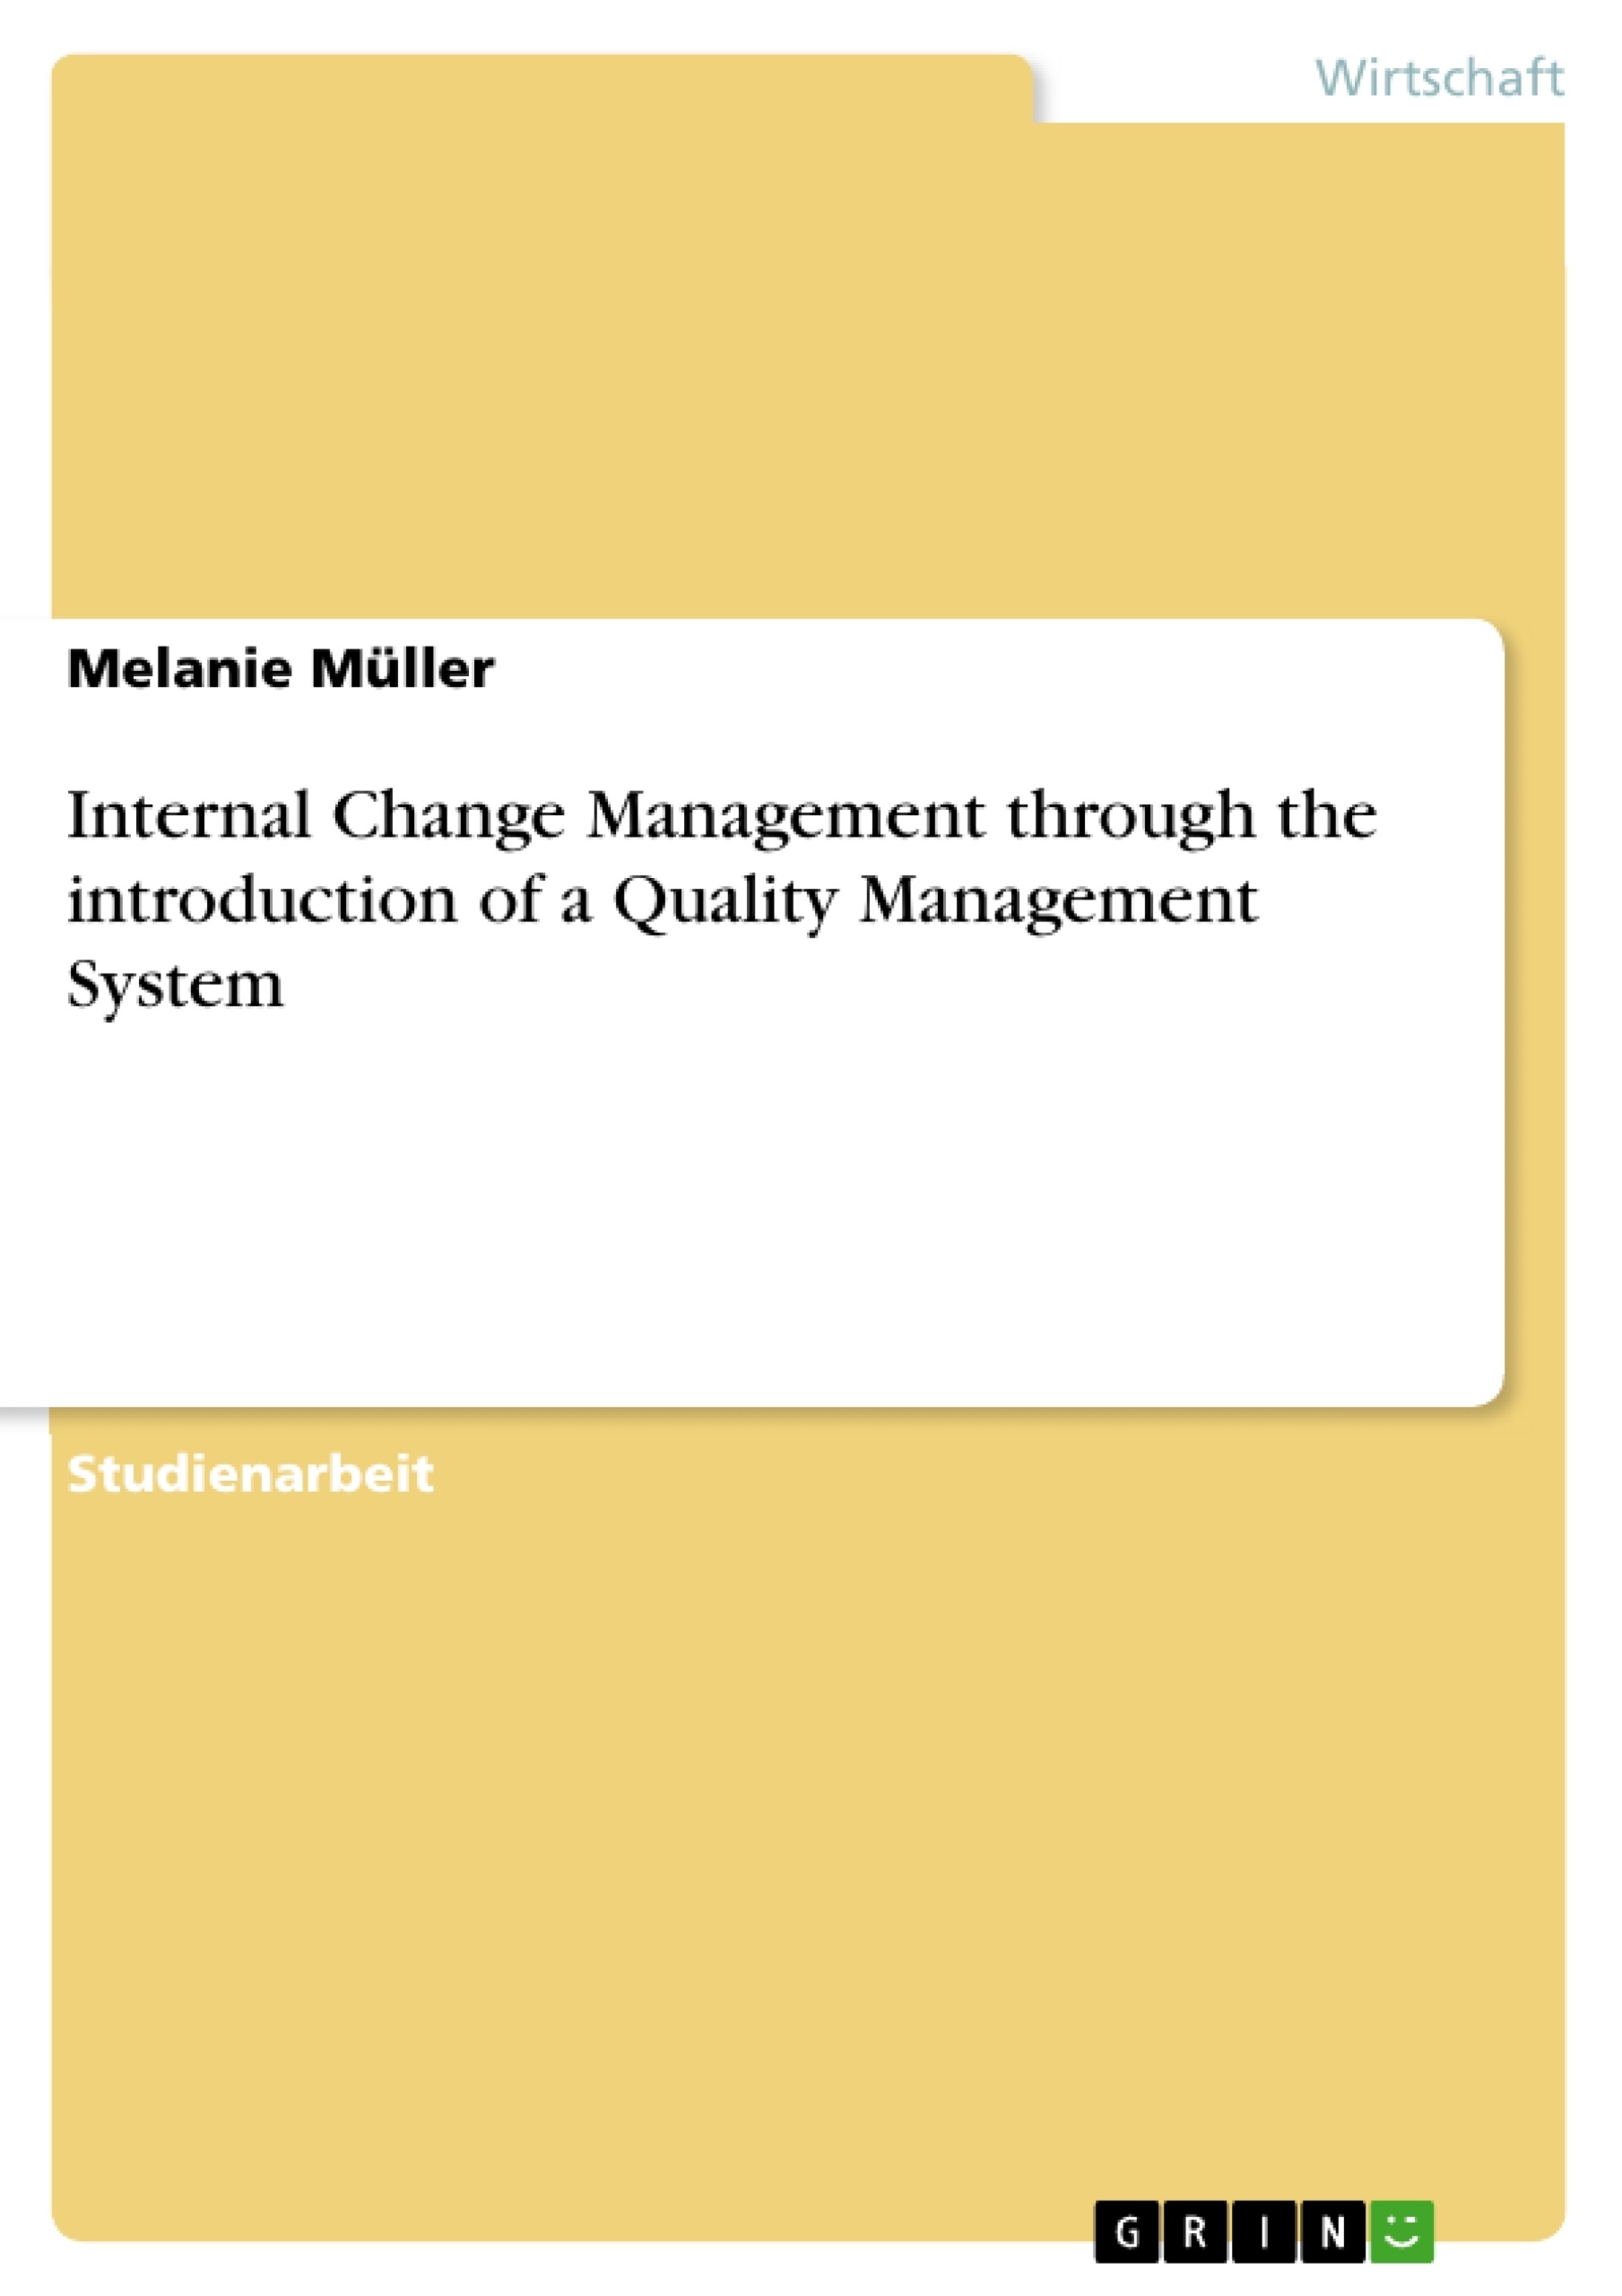 Titel: Internal Change Management through the introduction of a Quality Management System 